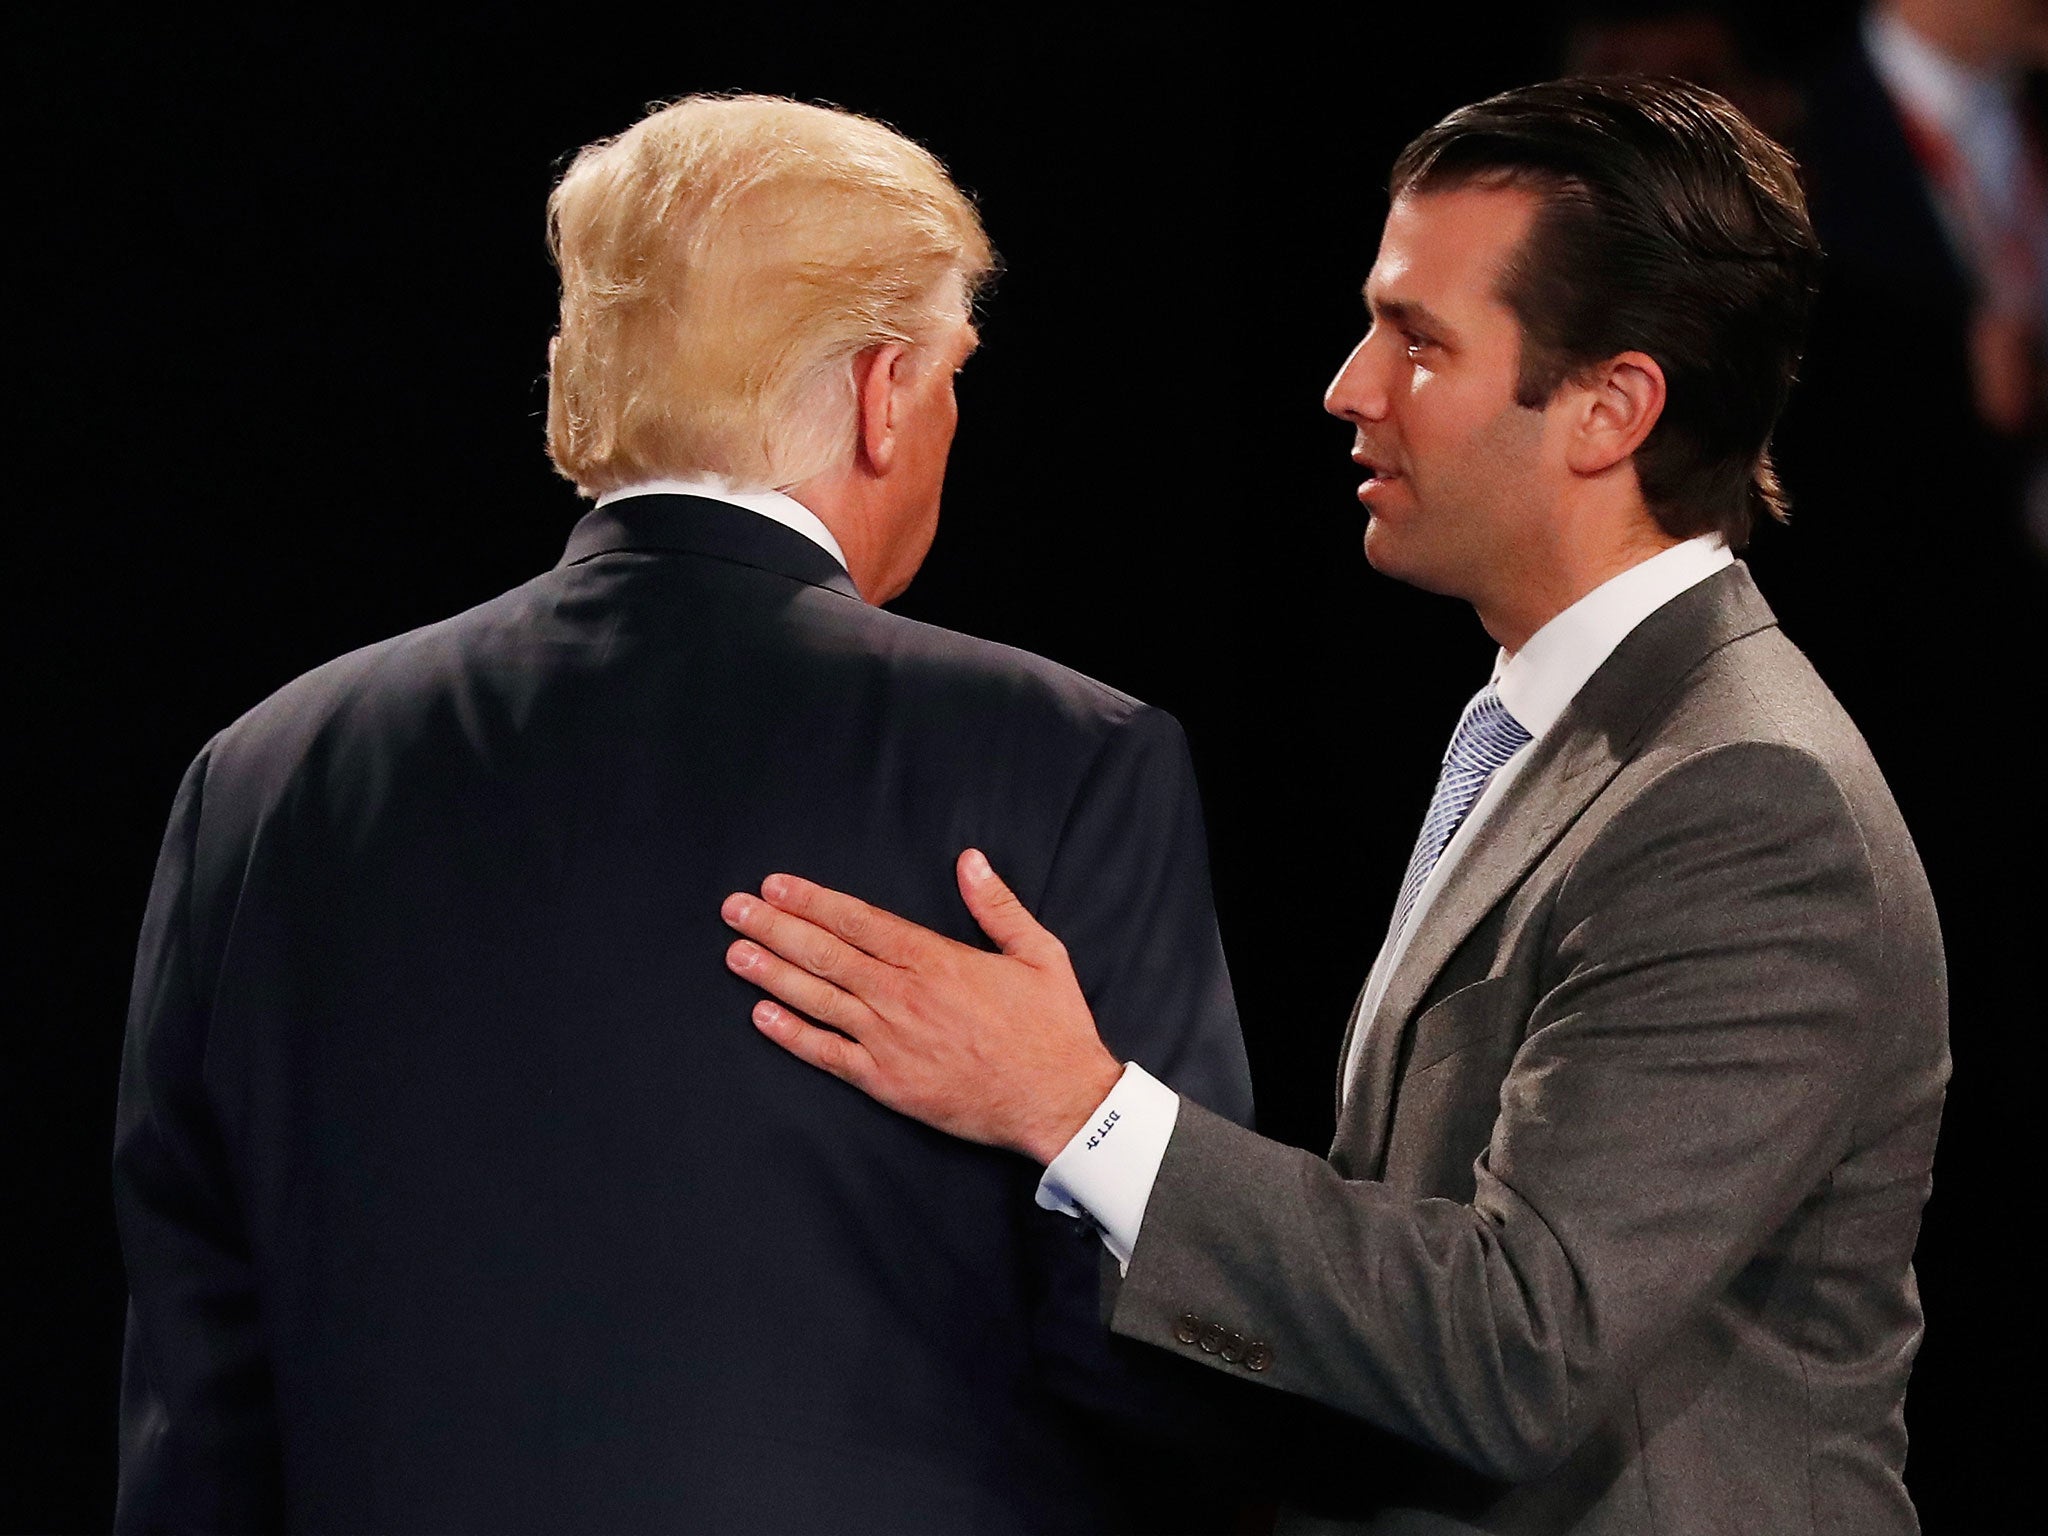 Donald Trump Jr's meeting with a Russian lawyer is being examined